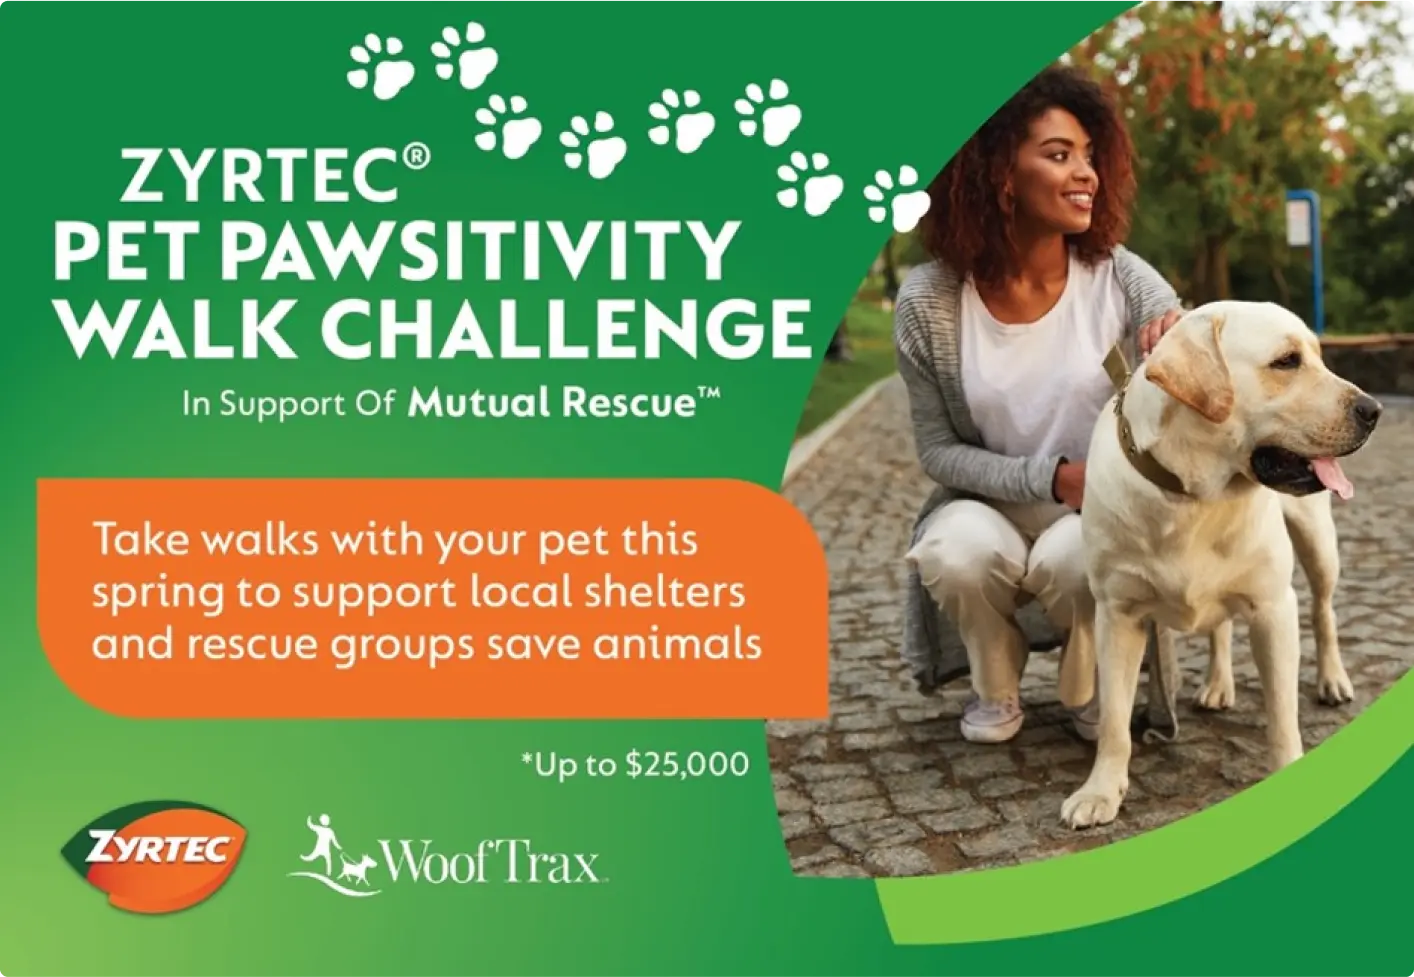 Zyrtec Pet Pawsitivity Challenge promotional banner image featuring a person and a dog on a walk.